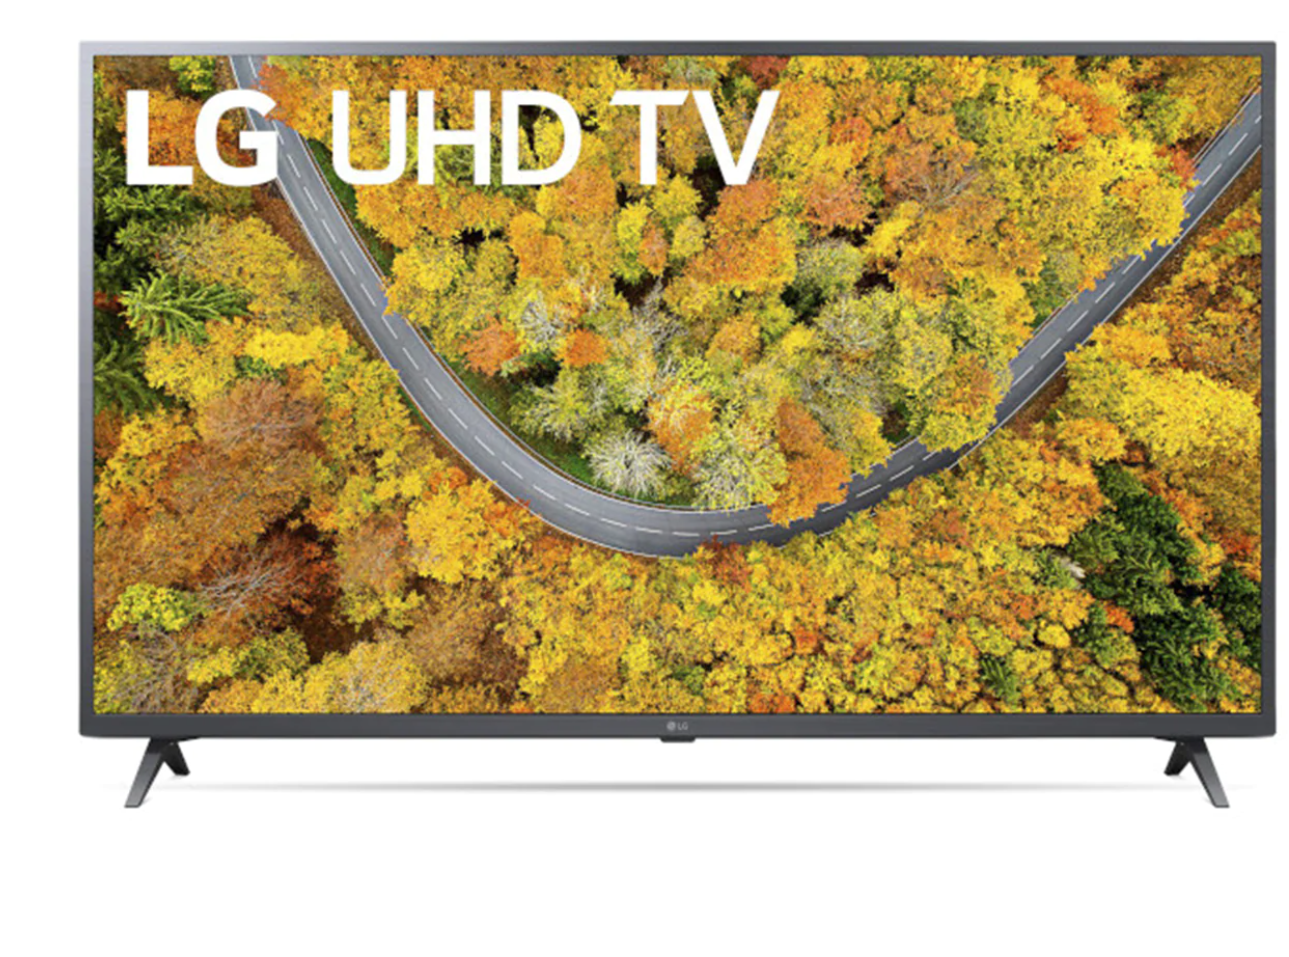 LG UHD 50" Class 4K Smart UHD TV with AI ThinQ(Refurbished) Tv's ONLY for delivery in San Diego and Tijuana